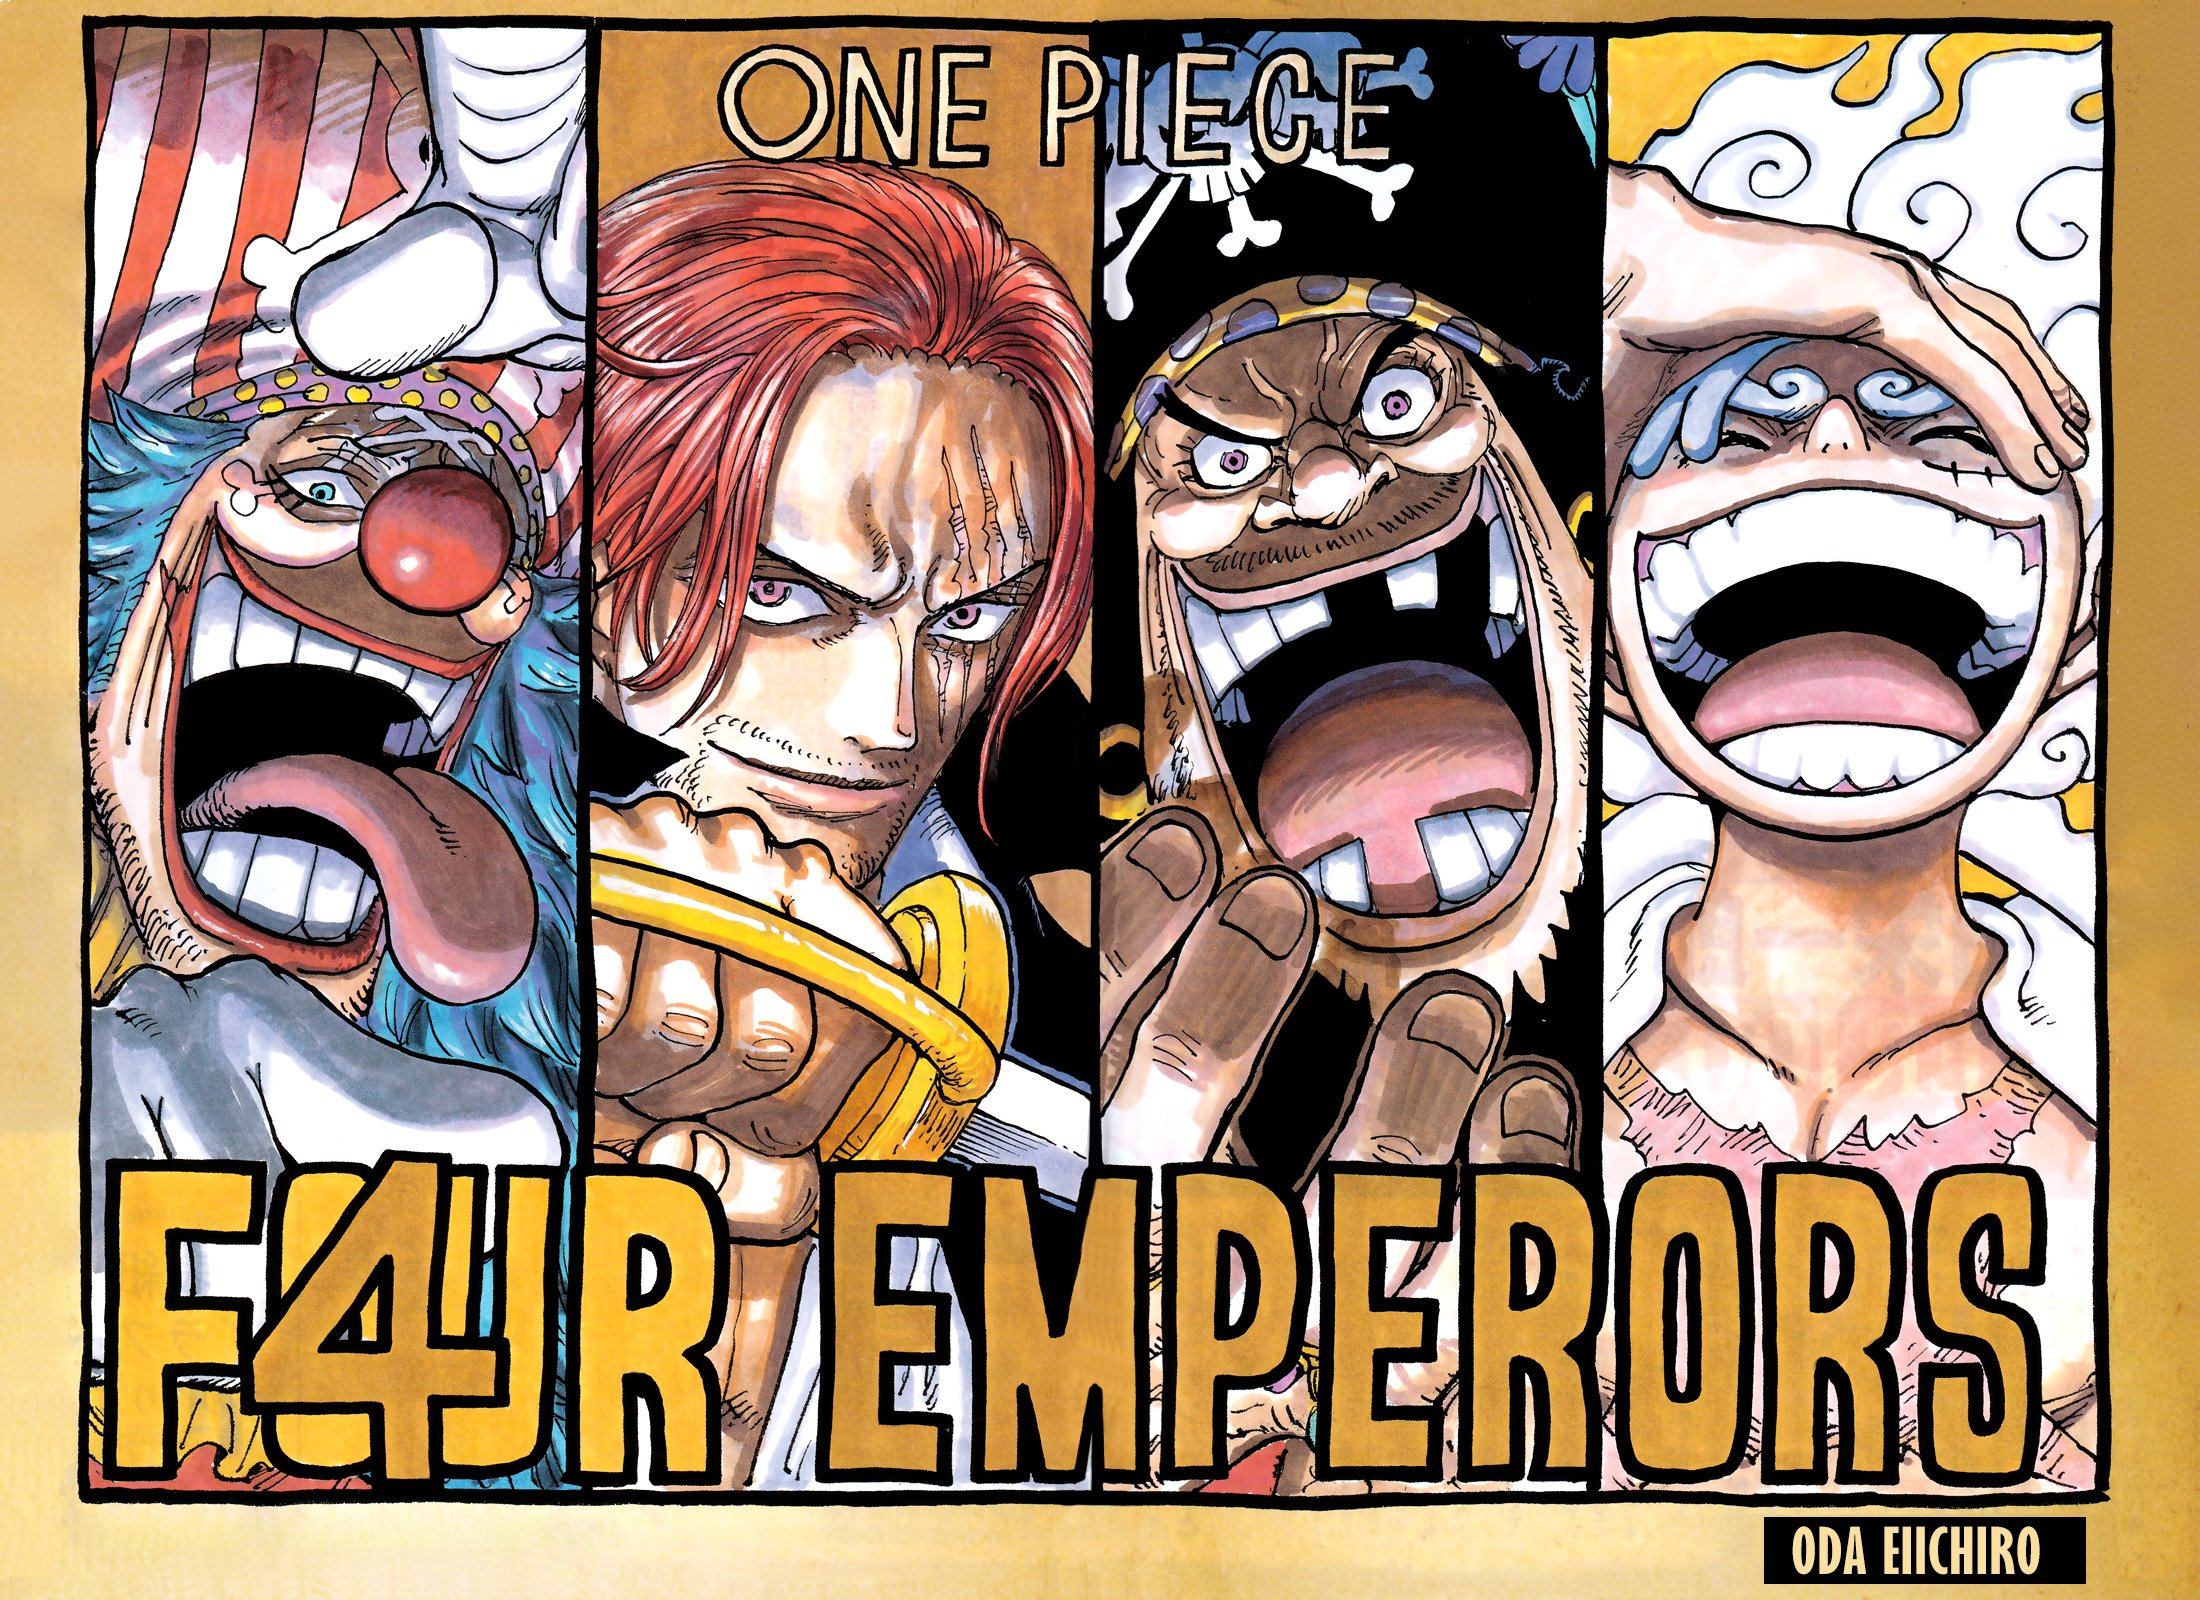 four emperors - One Piece Wallpaper (44521896) - Fanpop - Page 5